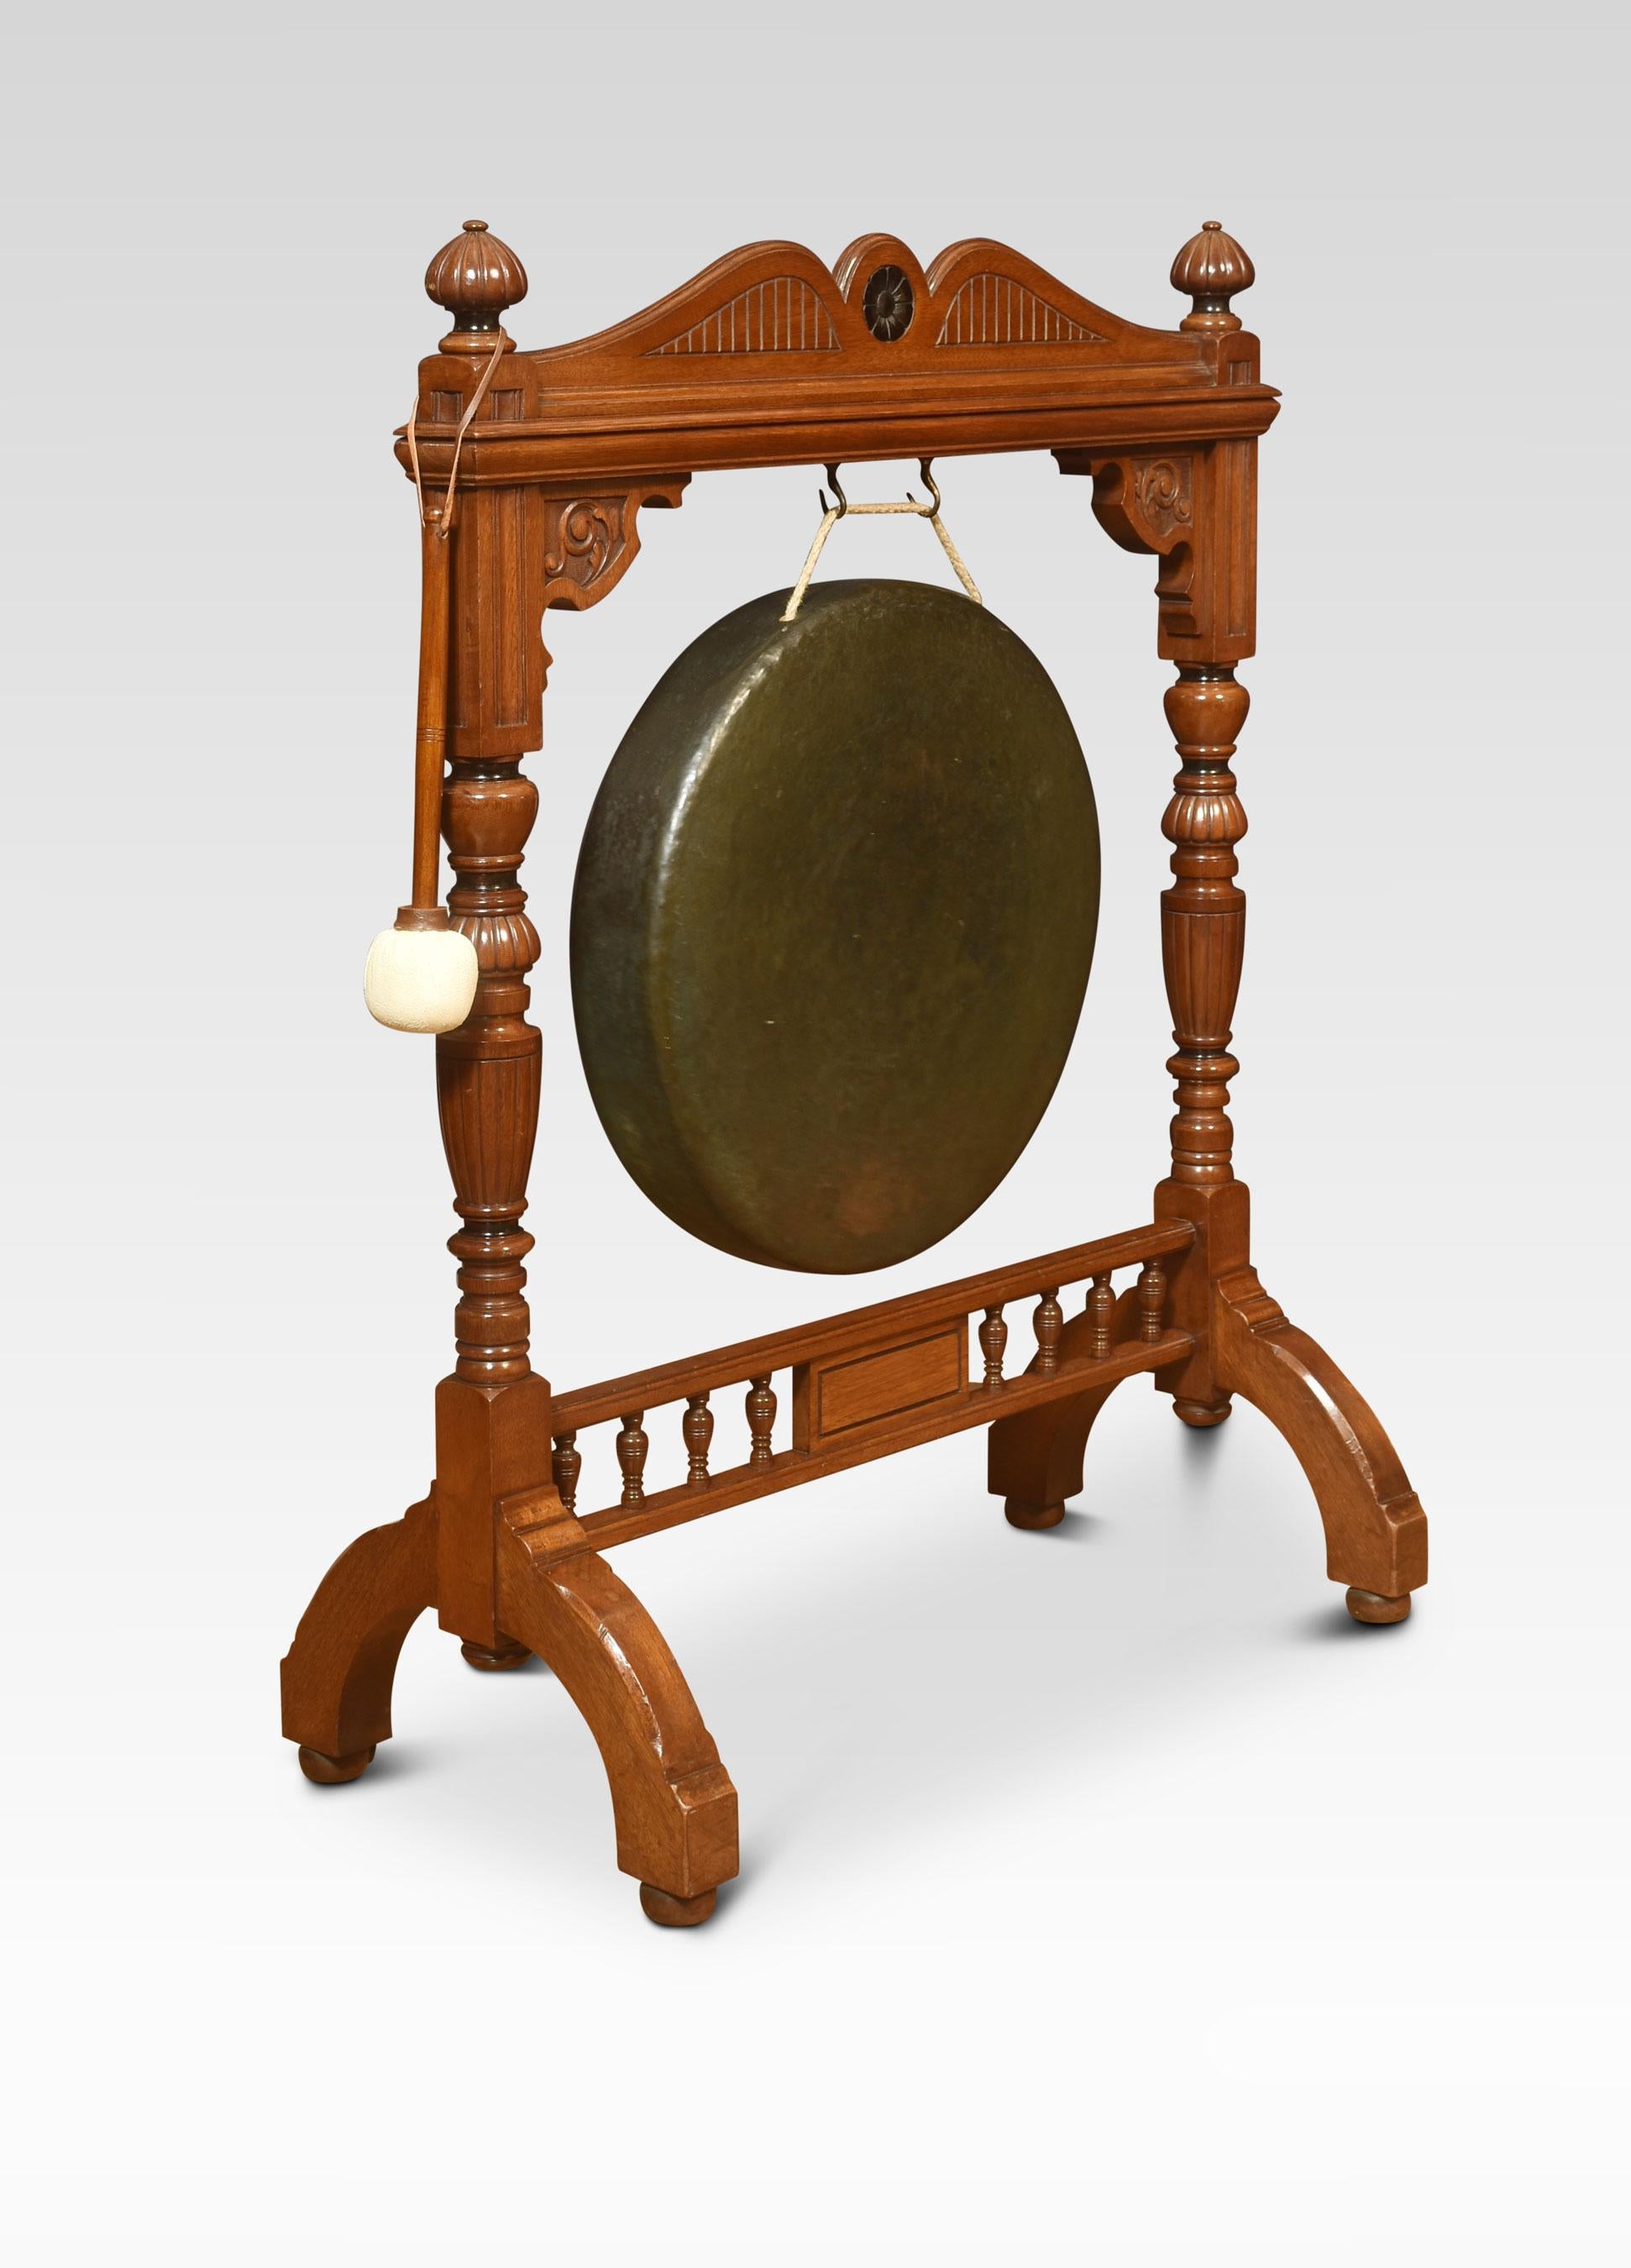 Large carved walnut dinner gong, the frame with scrolling decoration. Flanked by carved fluted uprights, supporting the original gong. All raised up on trestle base, with a striker.
Dimensions
Height 43 inches
Width 33 inches
Depth 16 inches.